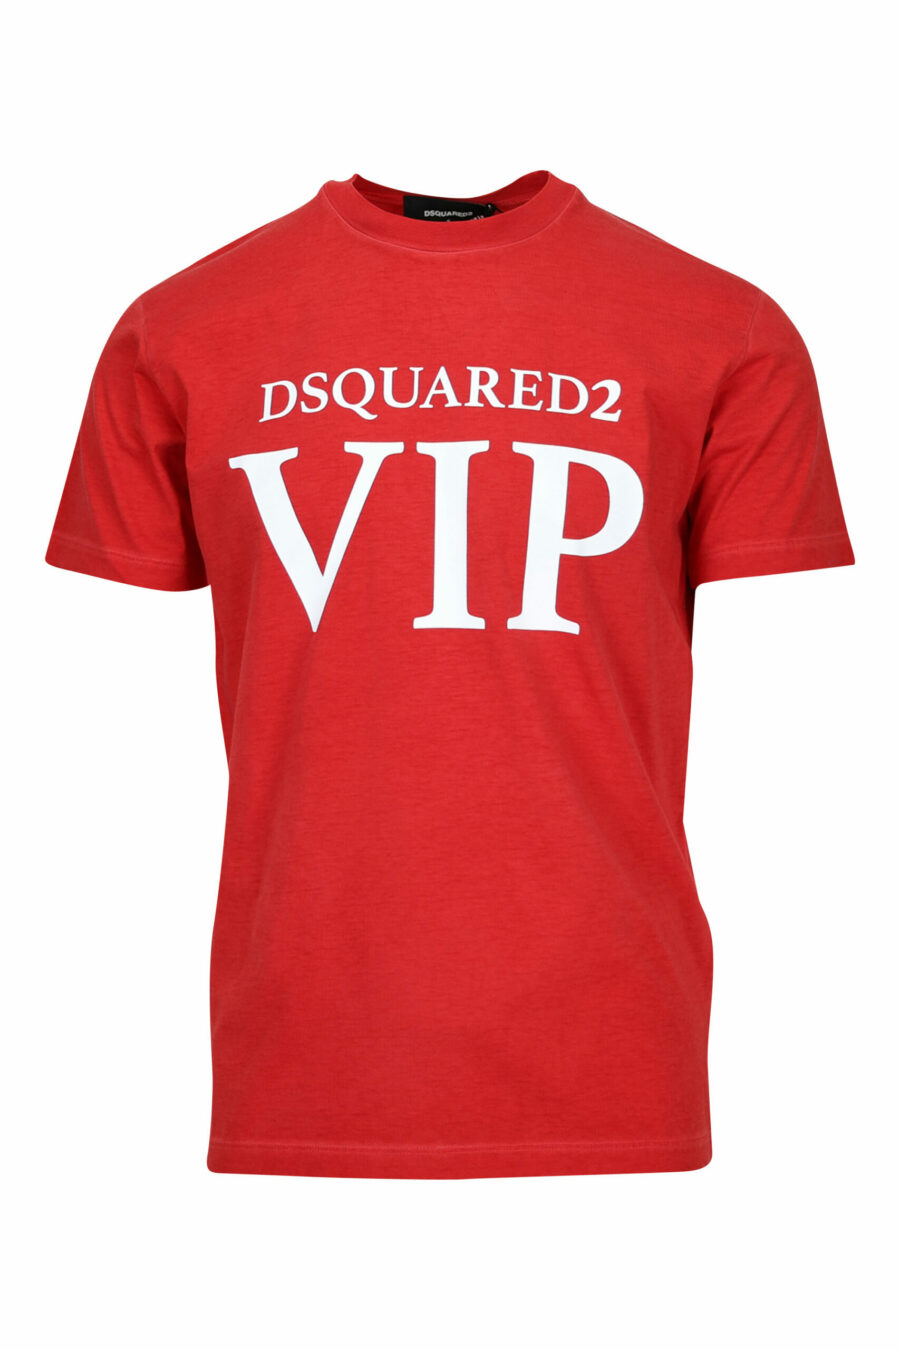 Red T-shirt with "vip" maxilogo - 8054148578923 scaled